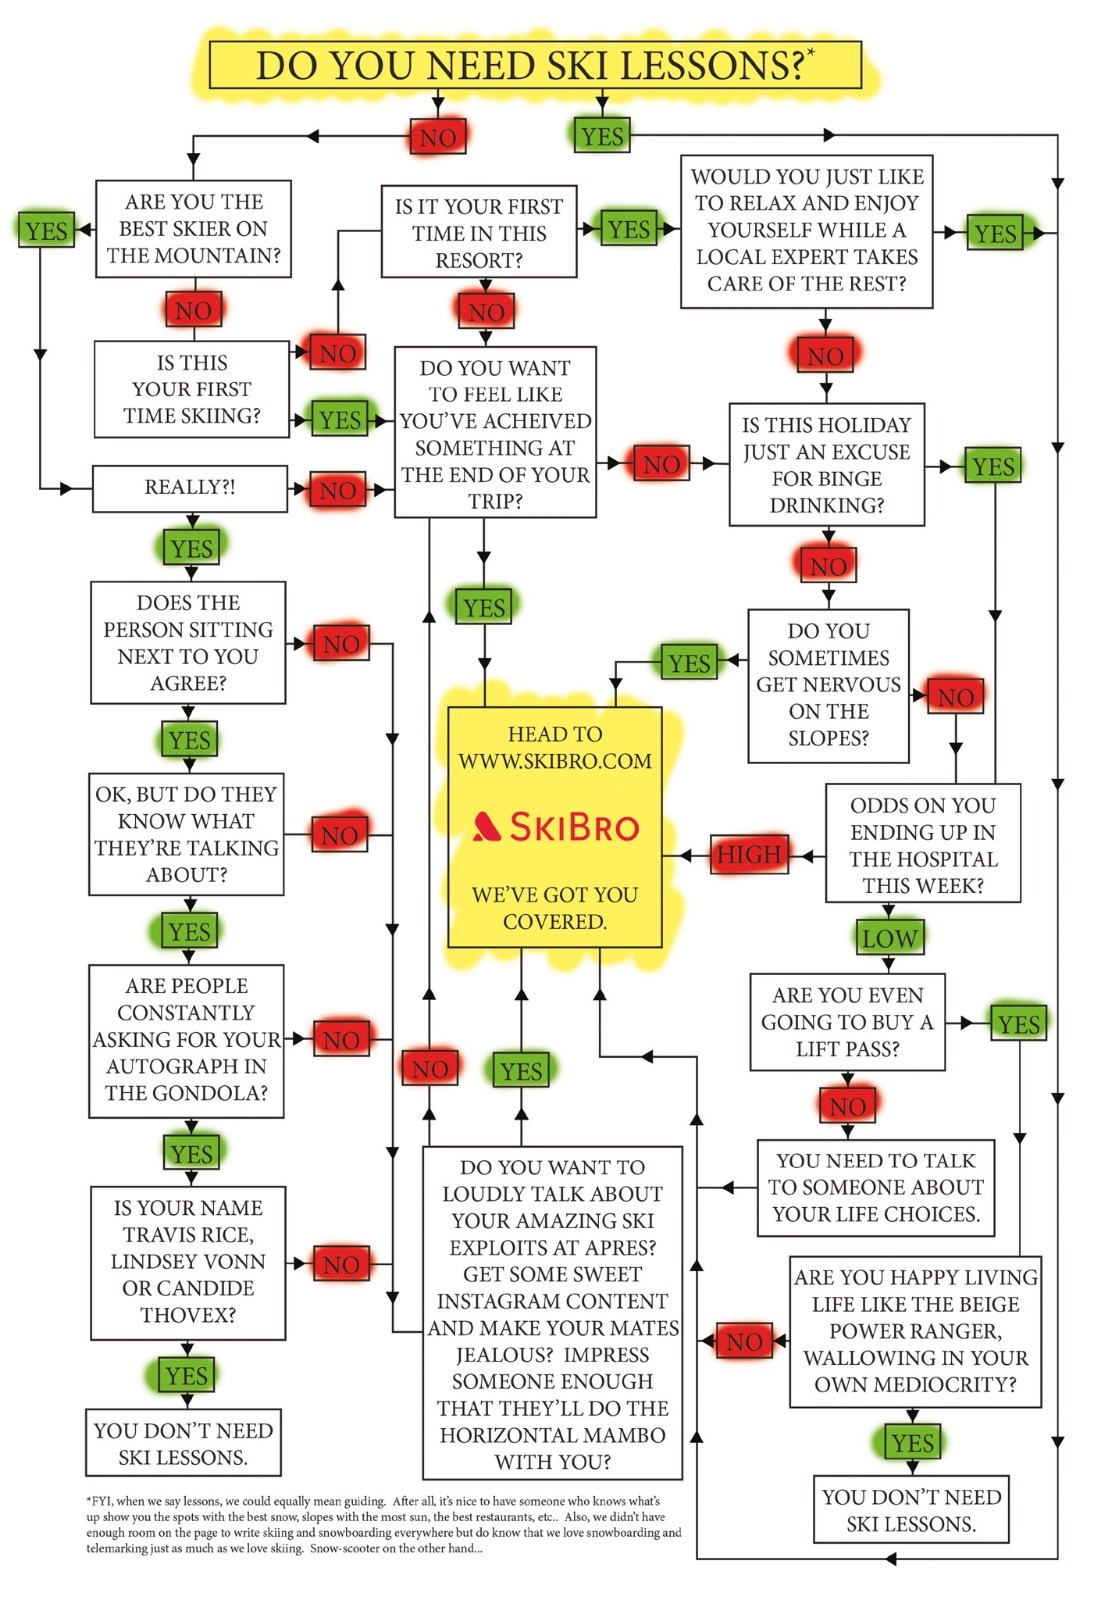 Not Sure If You Should Have Ski Lessons? Consult the Flow Chart Of Truth to Find Out!